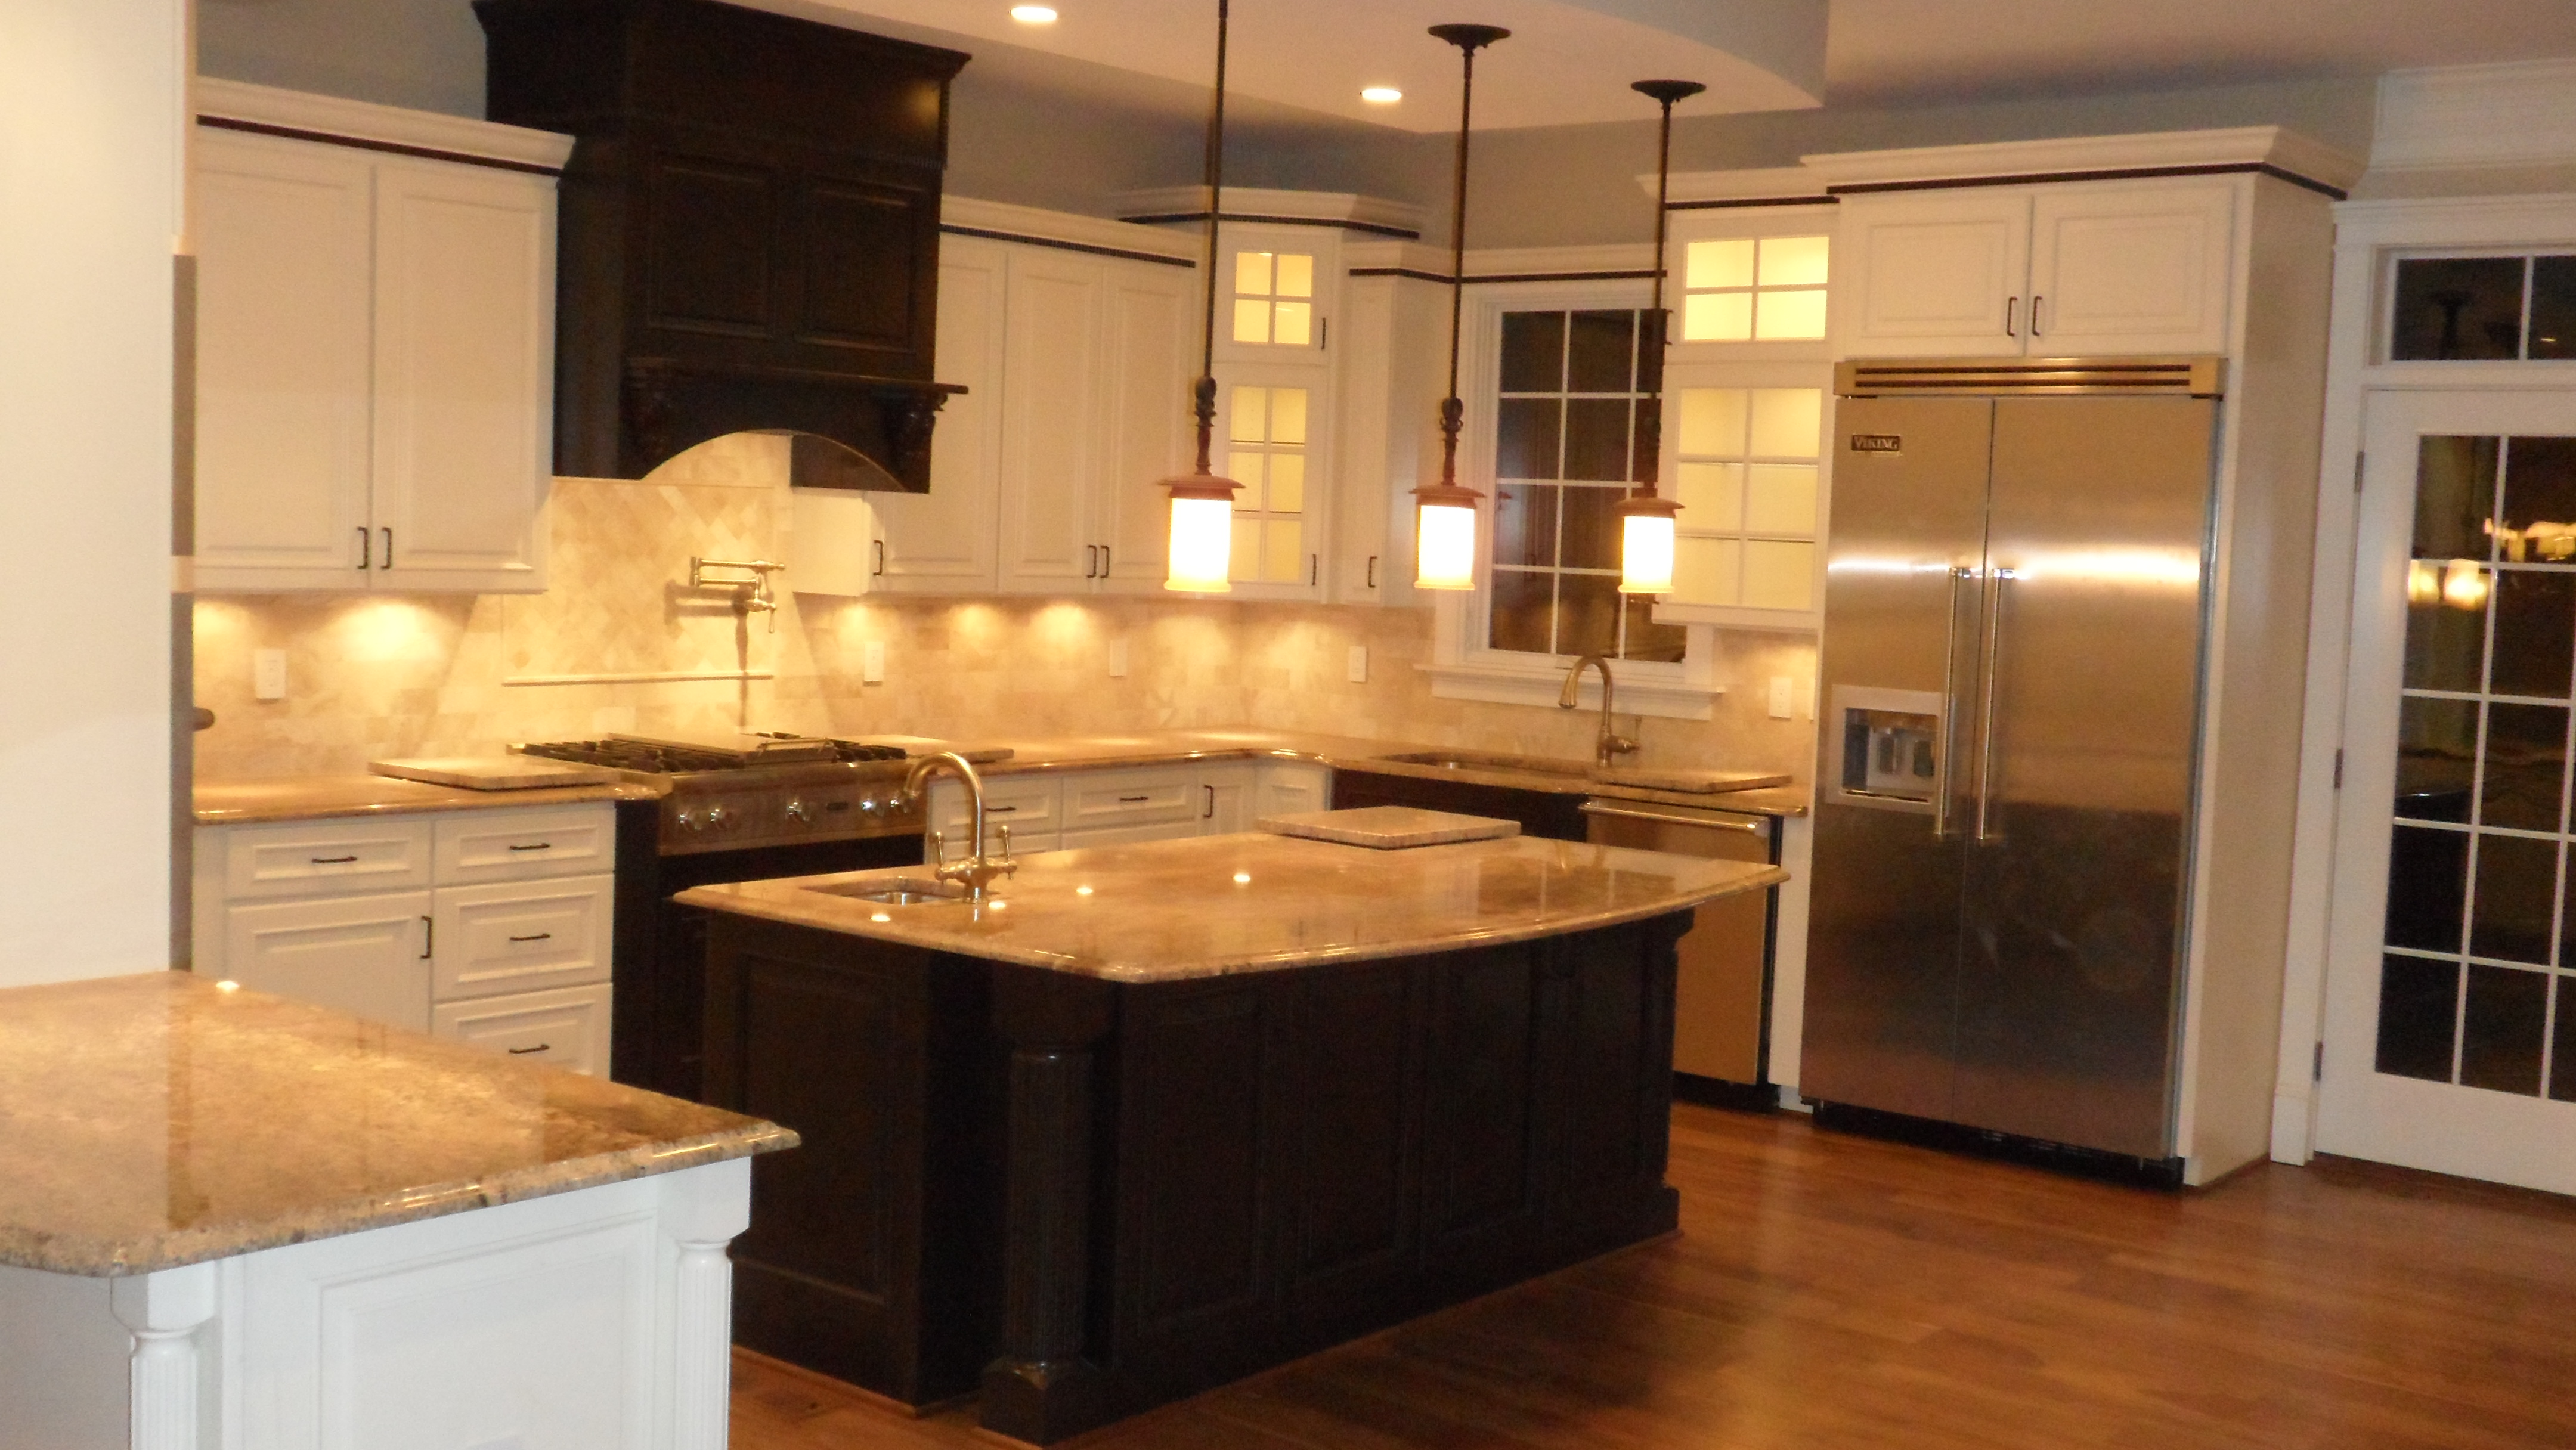 Kitchens Design And Remodeling In Northern Virginia And DC US